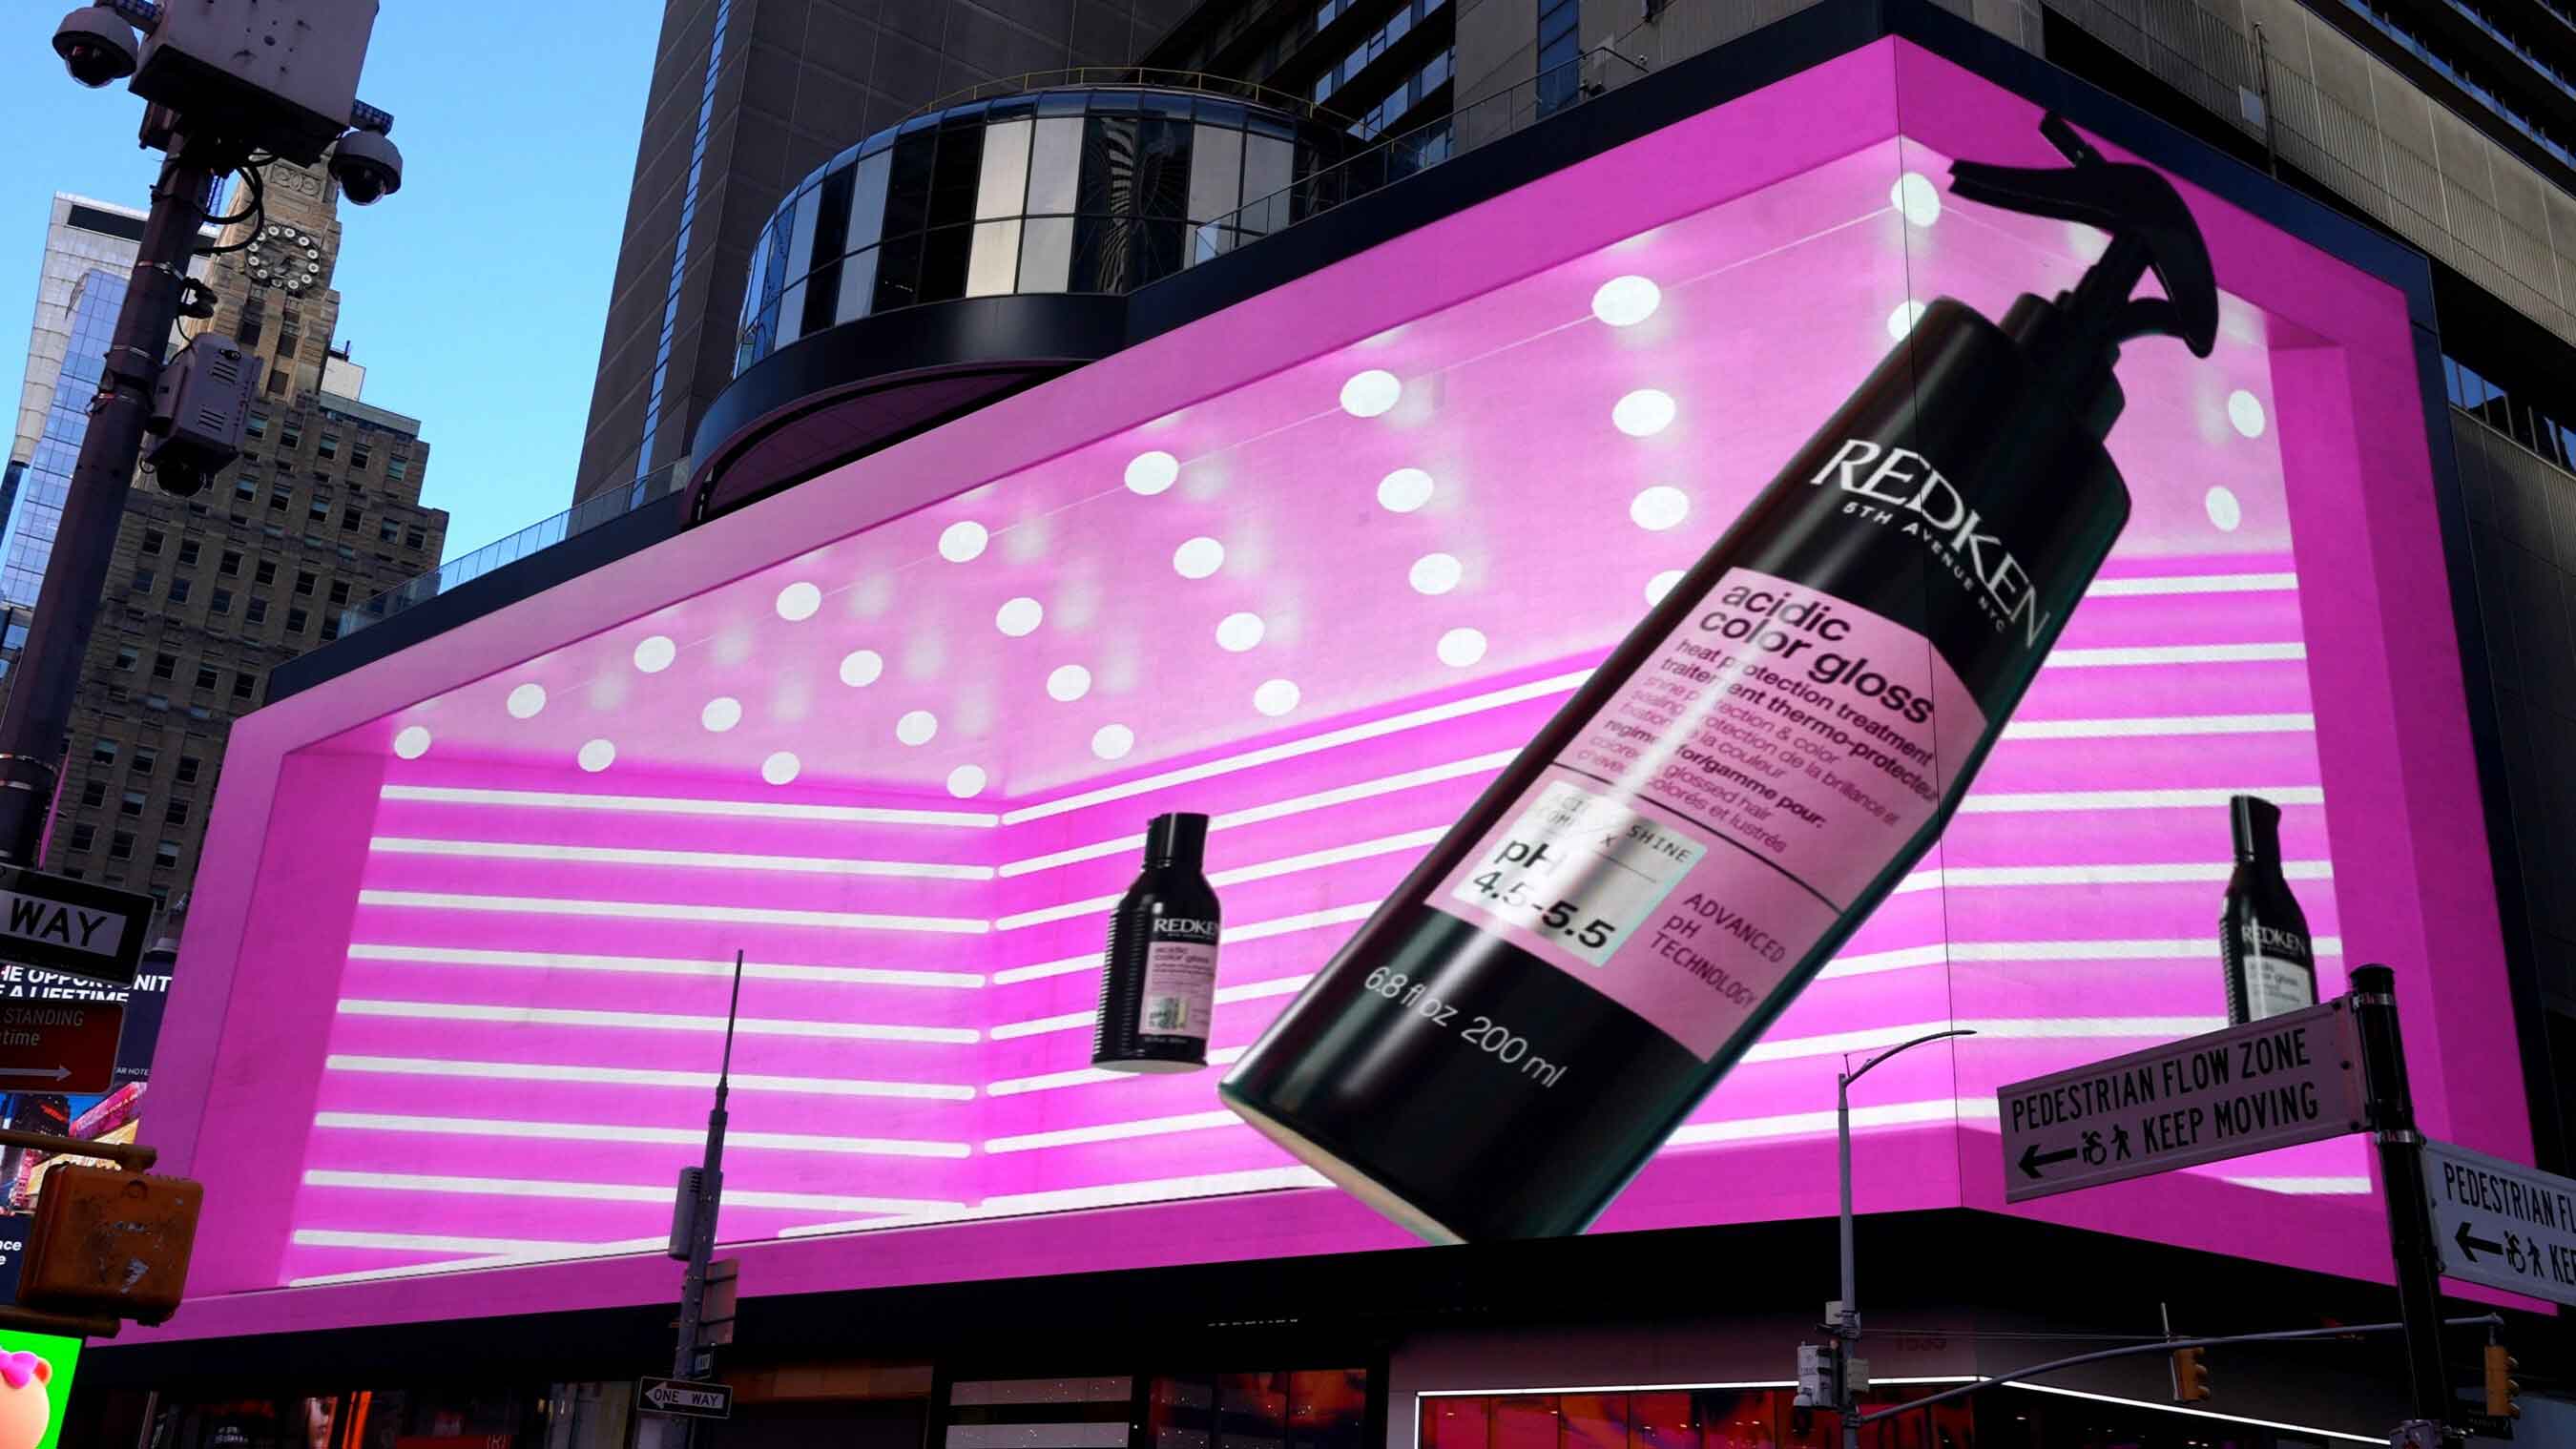 Redken 3D Billboard campaign at Times Square, New York